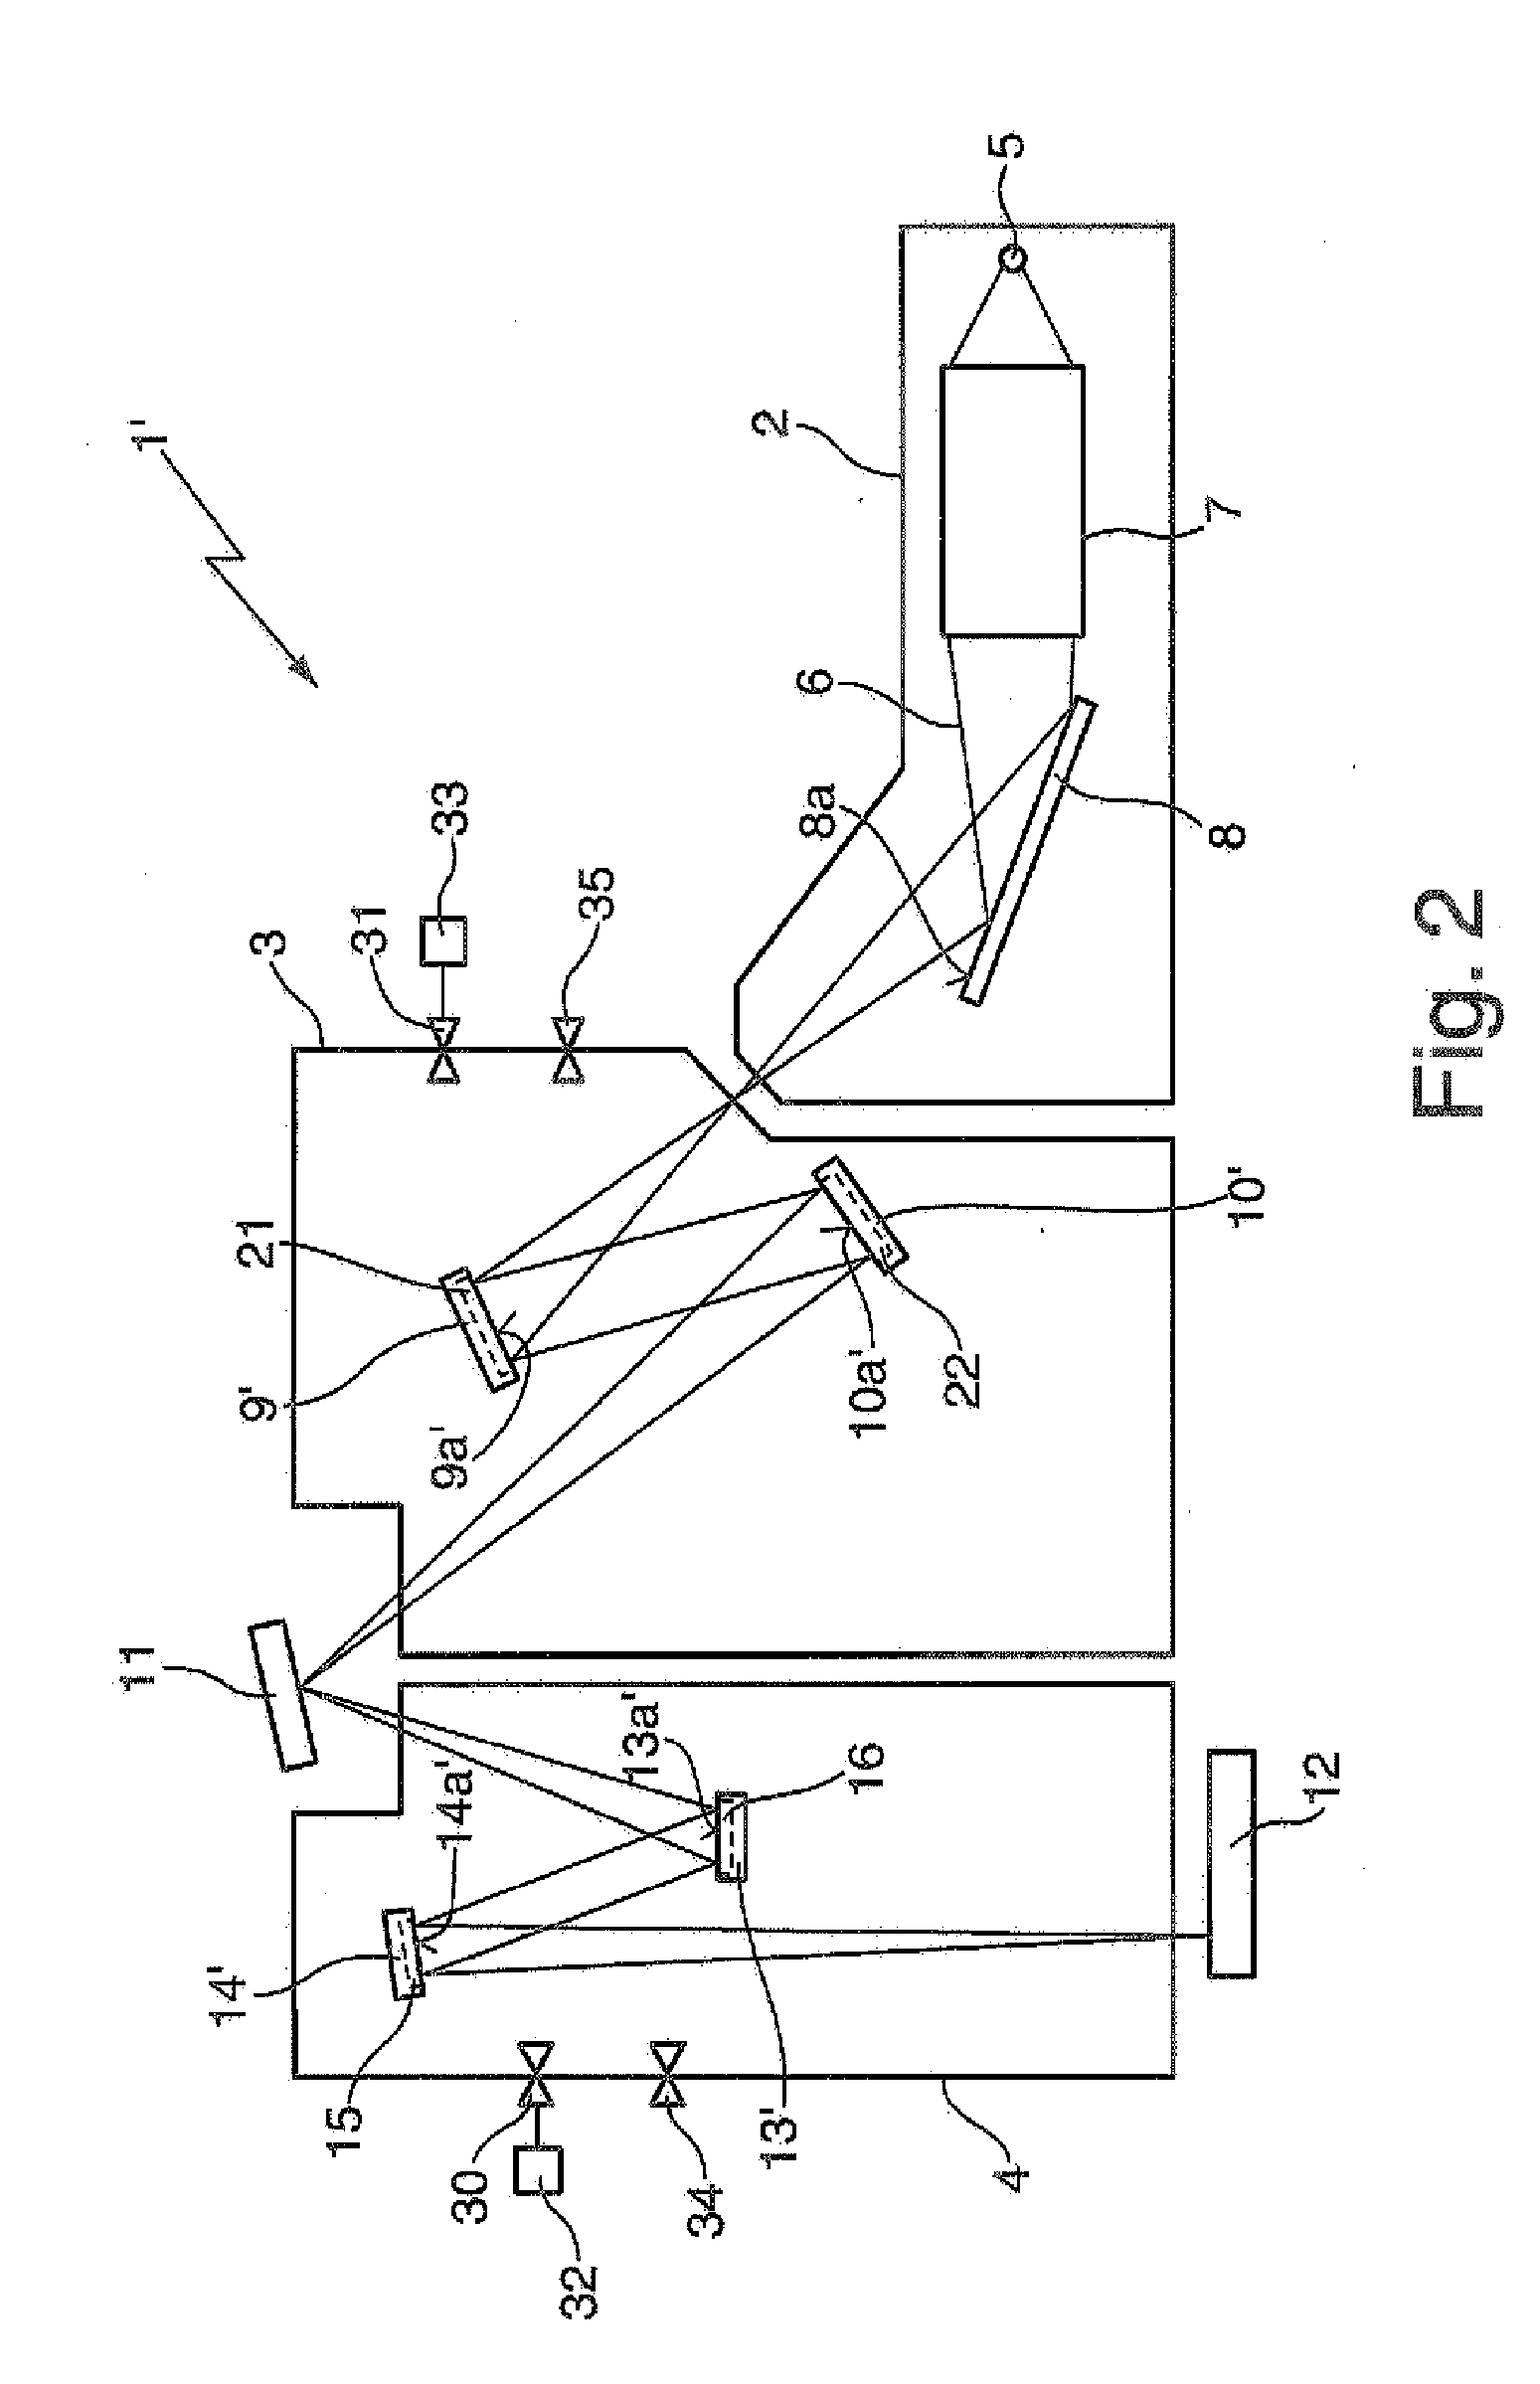 Optical arrangement and EUV lithography device with at least one heated optical element, operating methods, and methods for cleaning as well as for providing an optical element